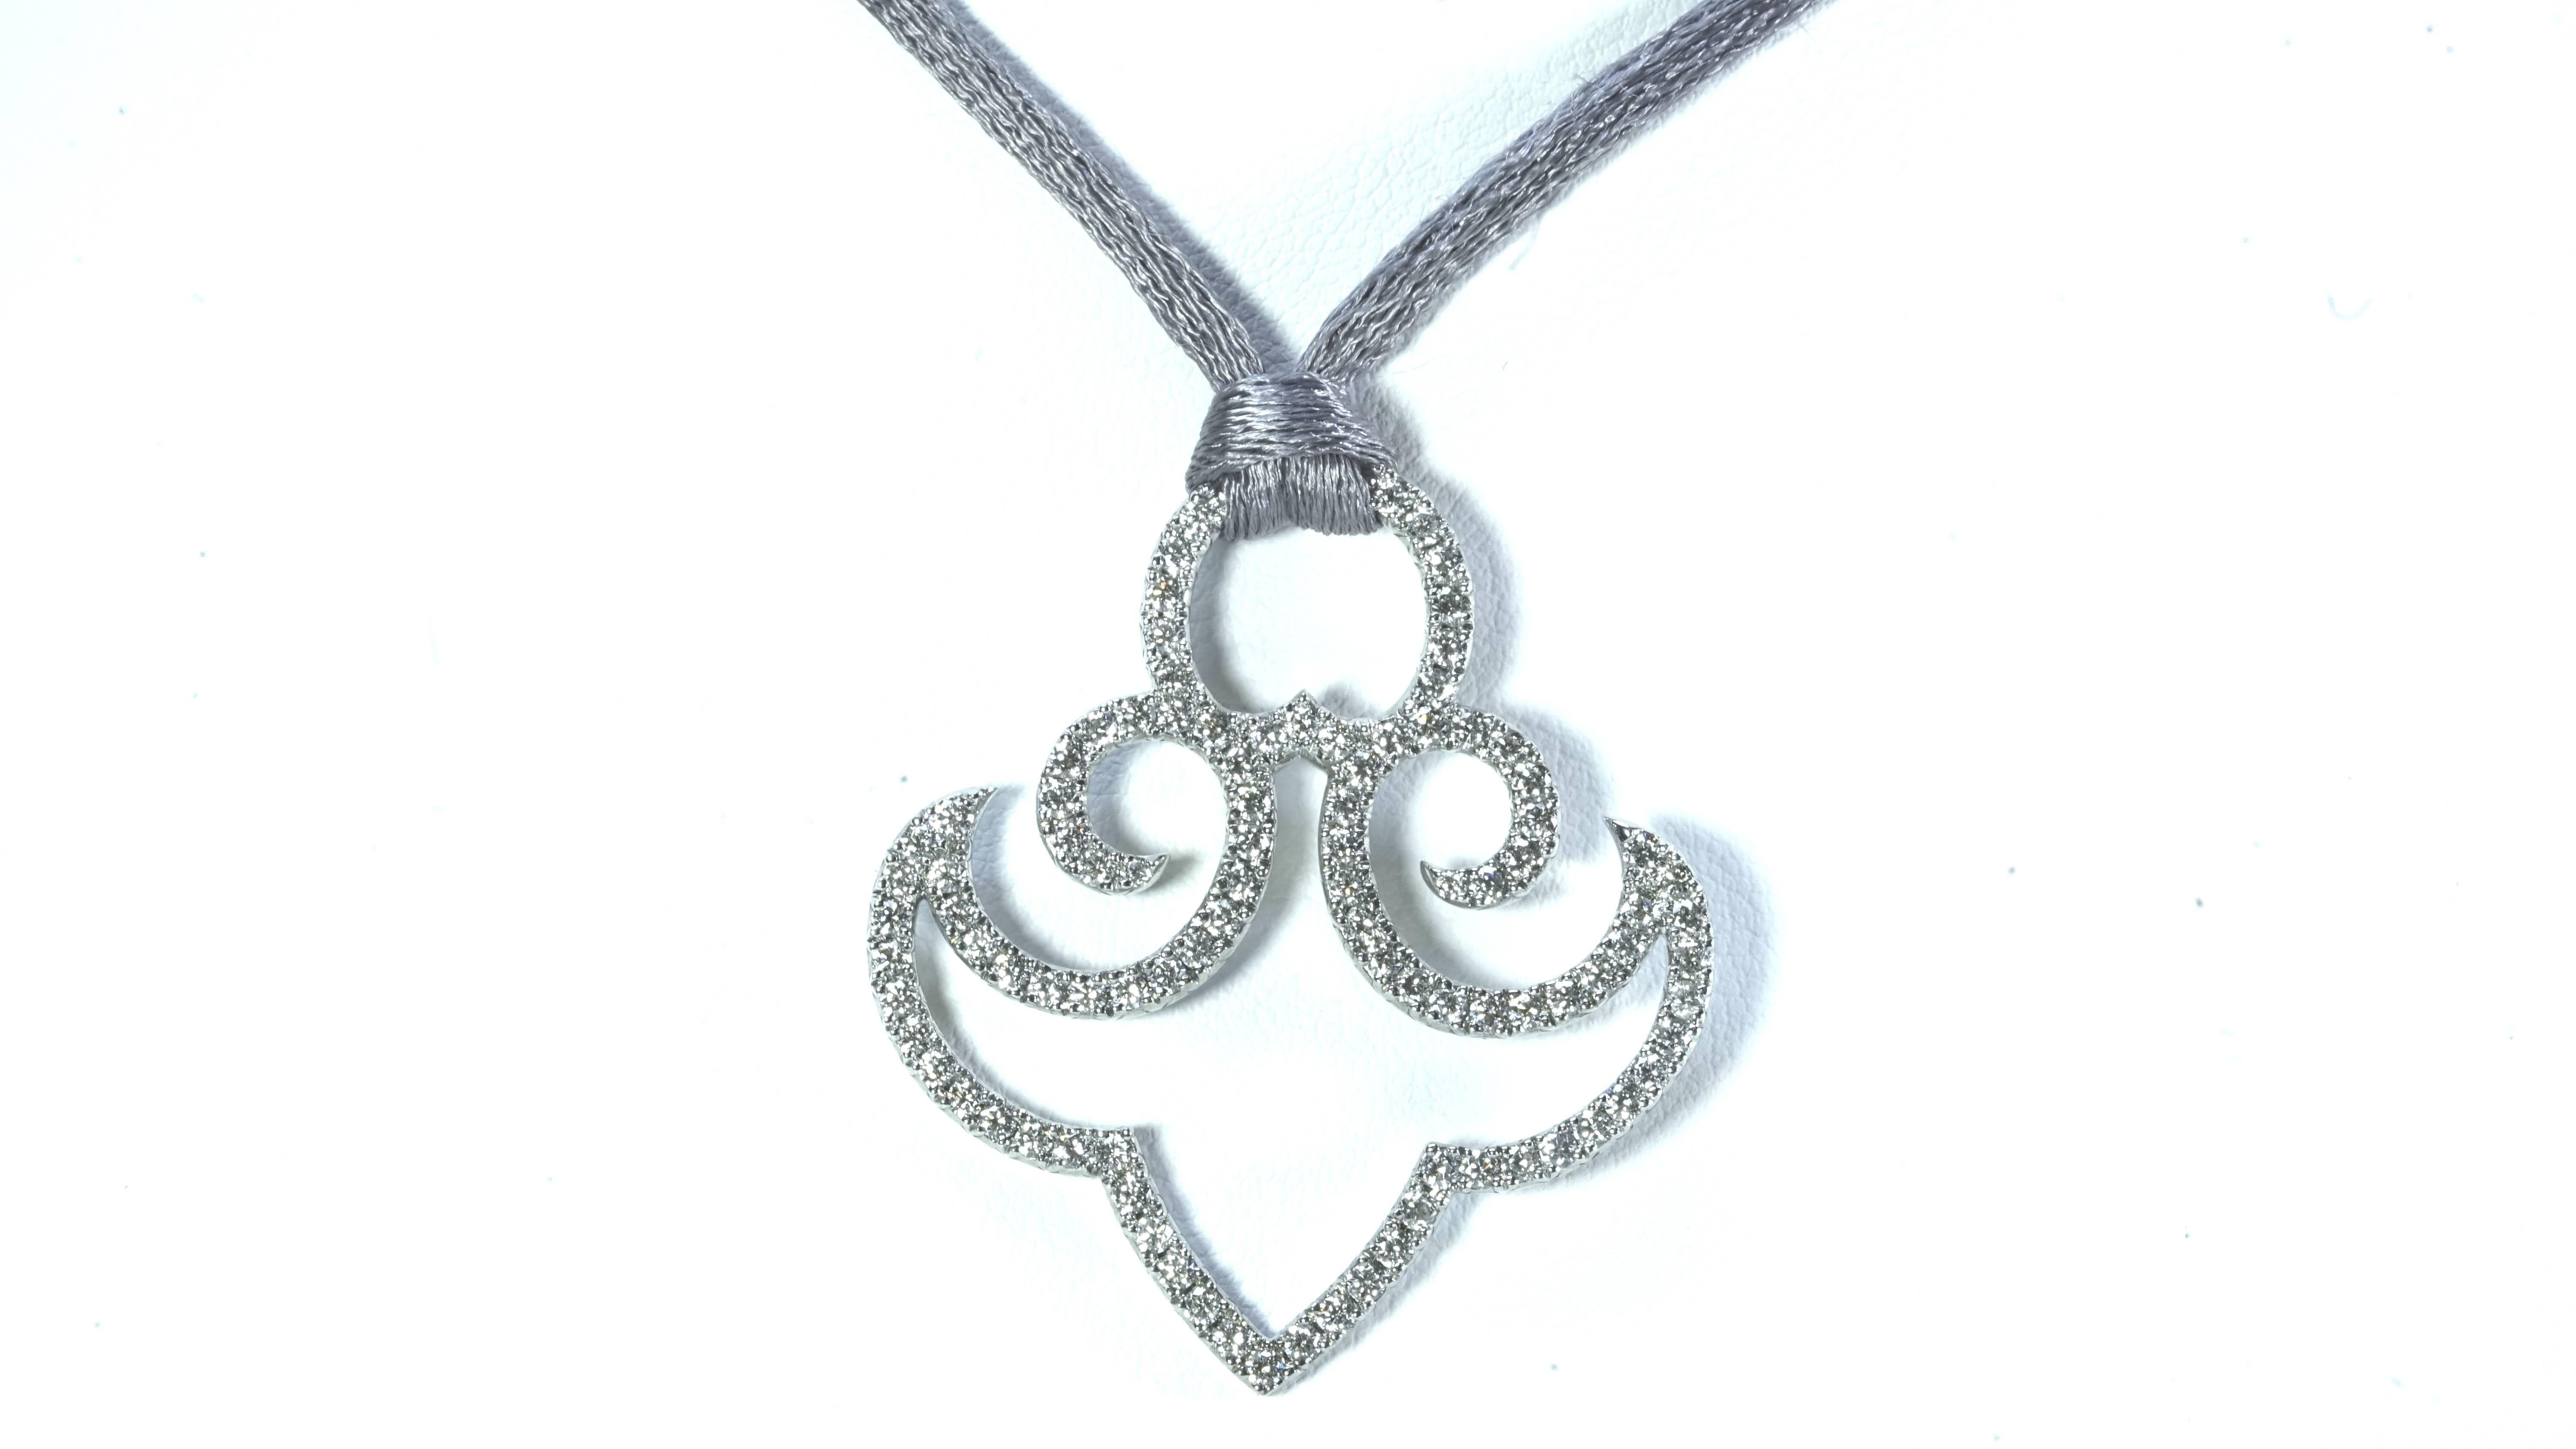 A delicate anchor pendant composed by 18k white gold and white diamonds.
Created by Marion Jeantet, French assay mark and signed.
Chain weight: 2.61grs, 45.5cm lenght
Pendant weight: 5.25grs, 
Loop weight: 0.72gr
White diamonds weight: 1.75ct